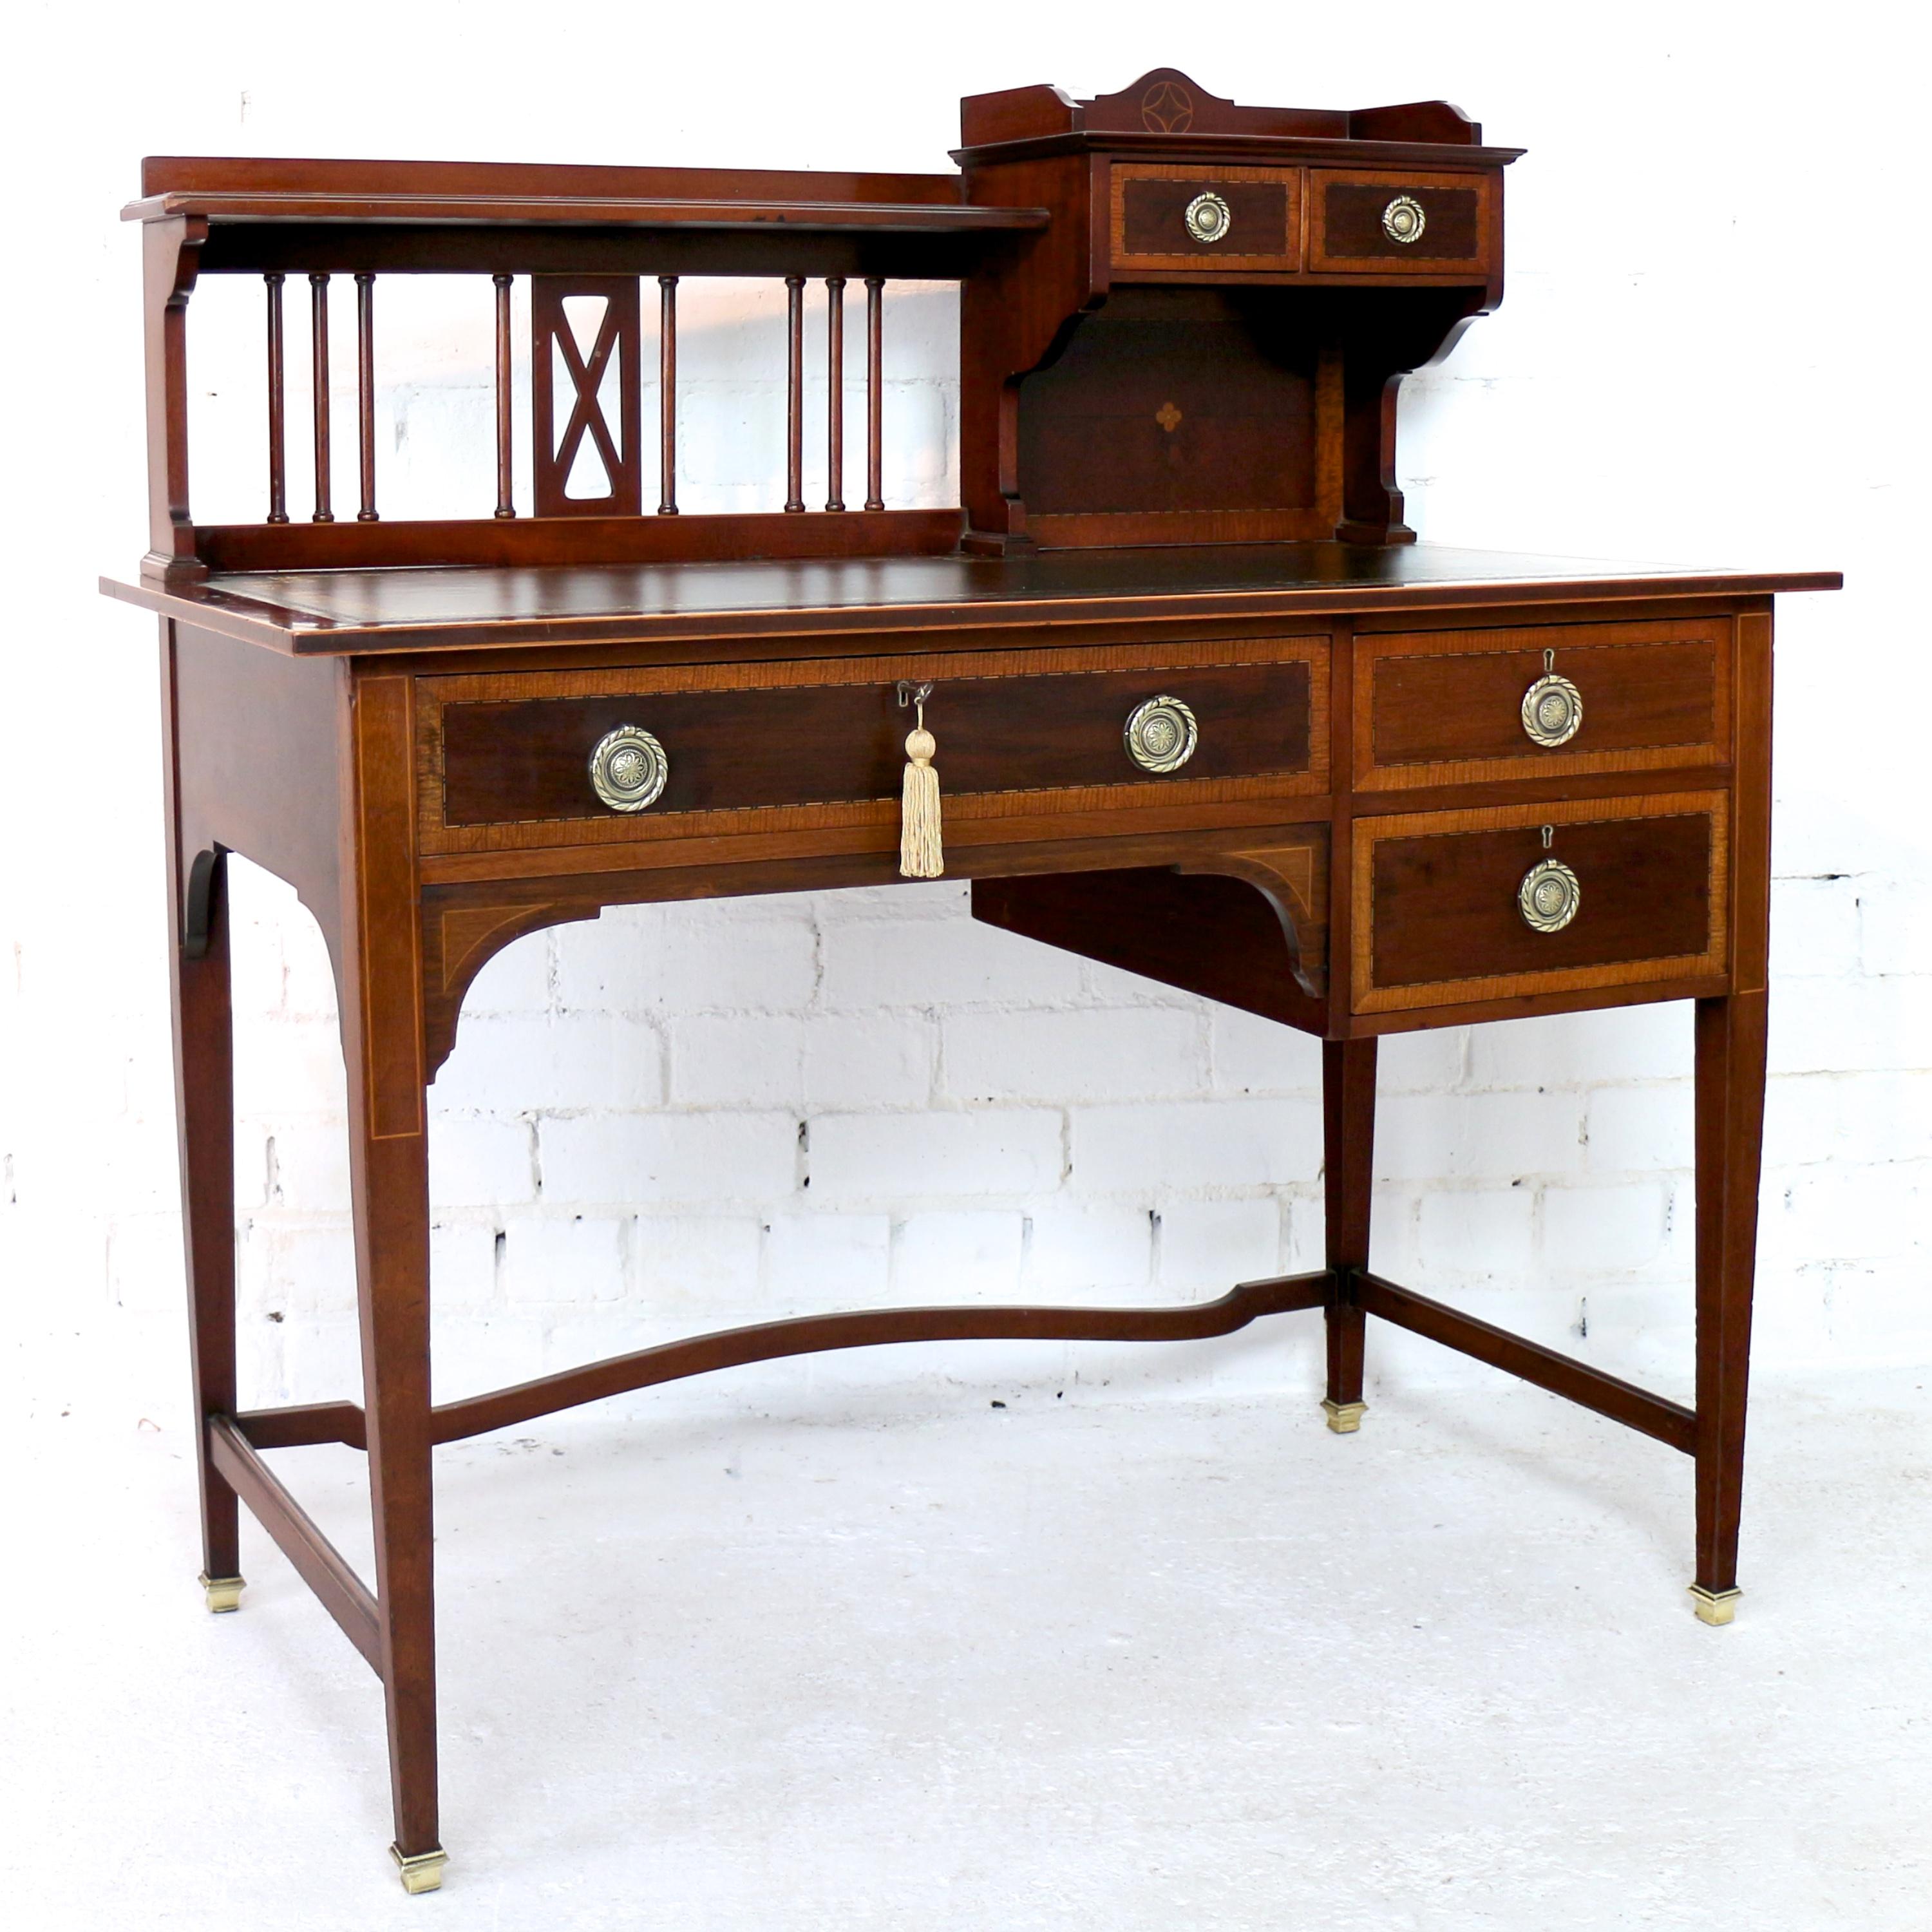 A lovely Sheraton revival mahogany and inlaid writing desk attributed to Shapland & Petter of Barnstaple and dating to circa 1900. With satinwood crossbanding and box and ebony line inlays it features a superstructure with Arts & Crafts influenced